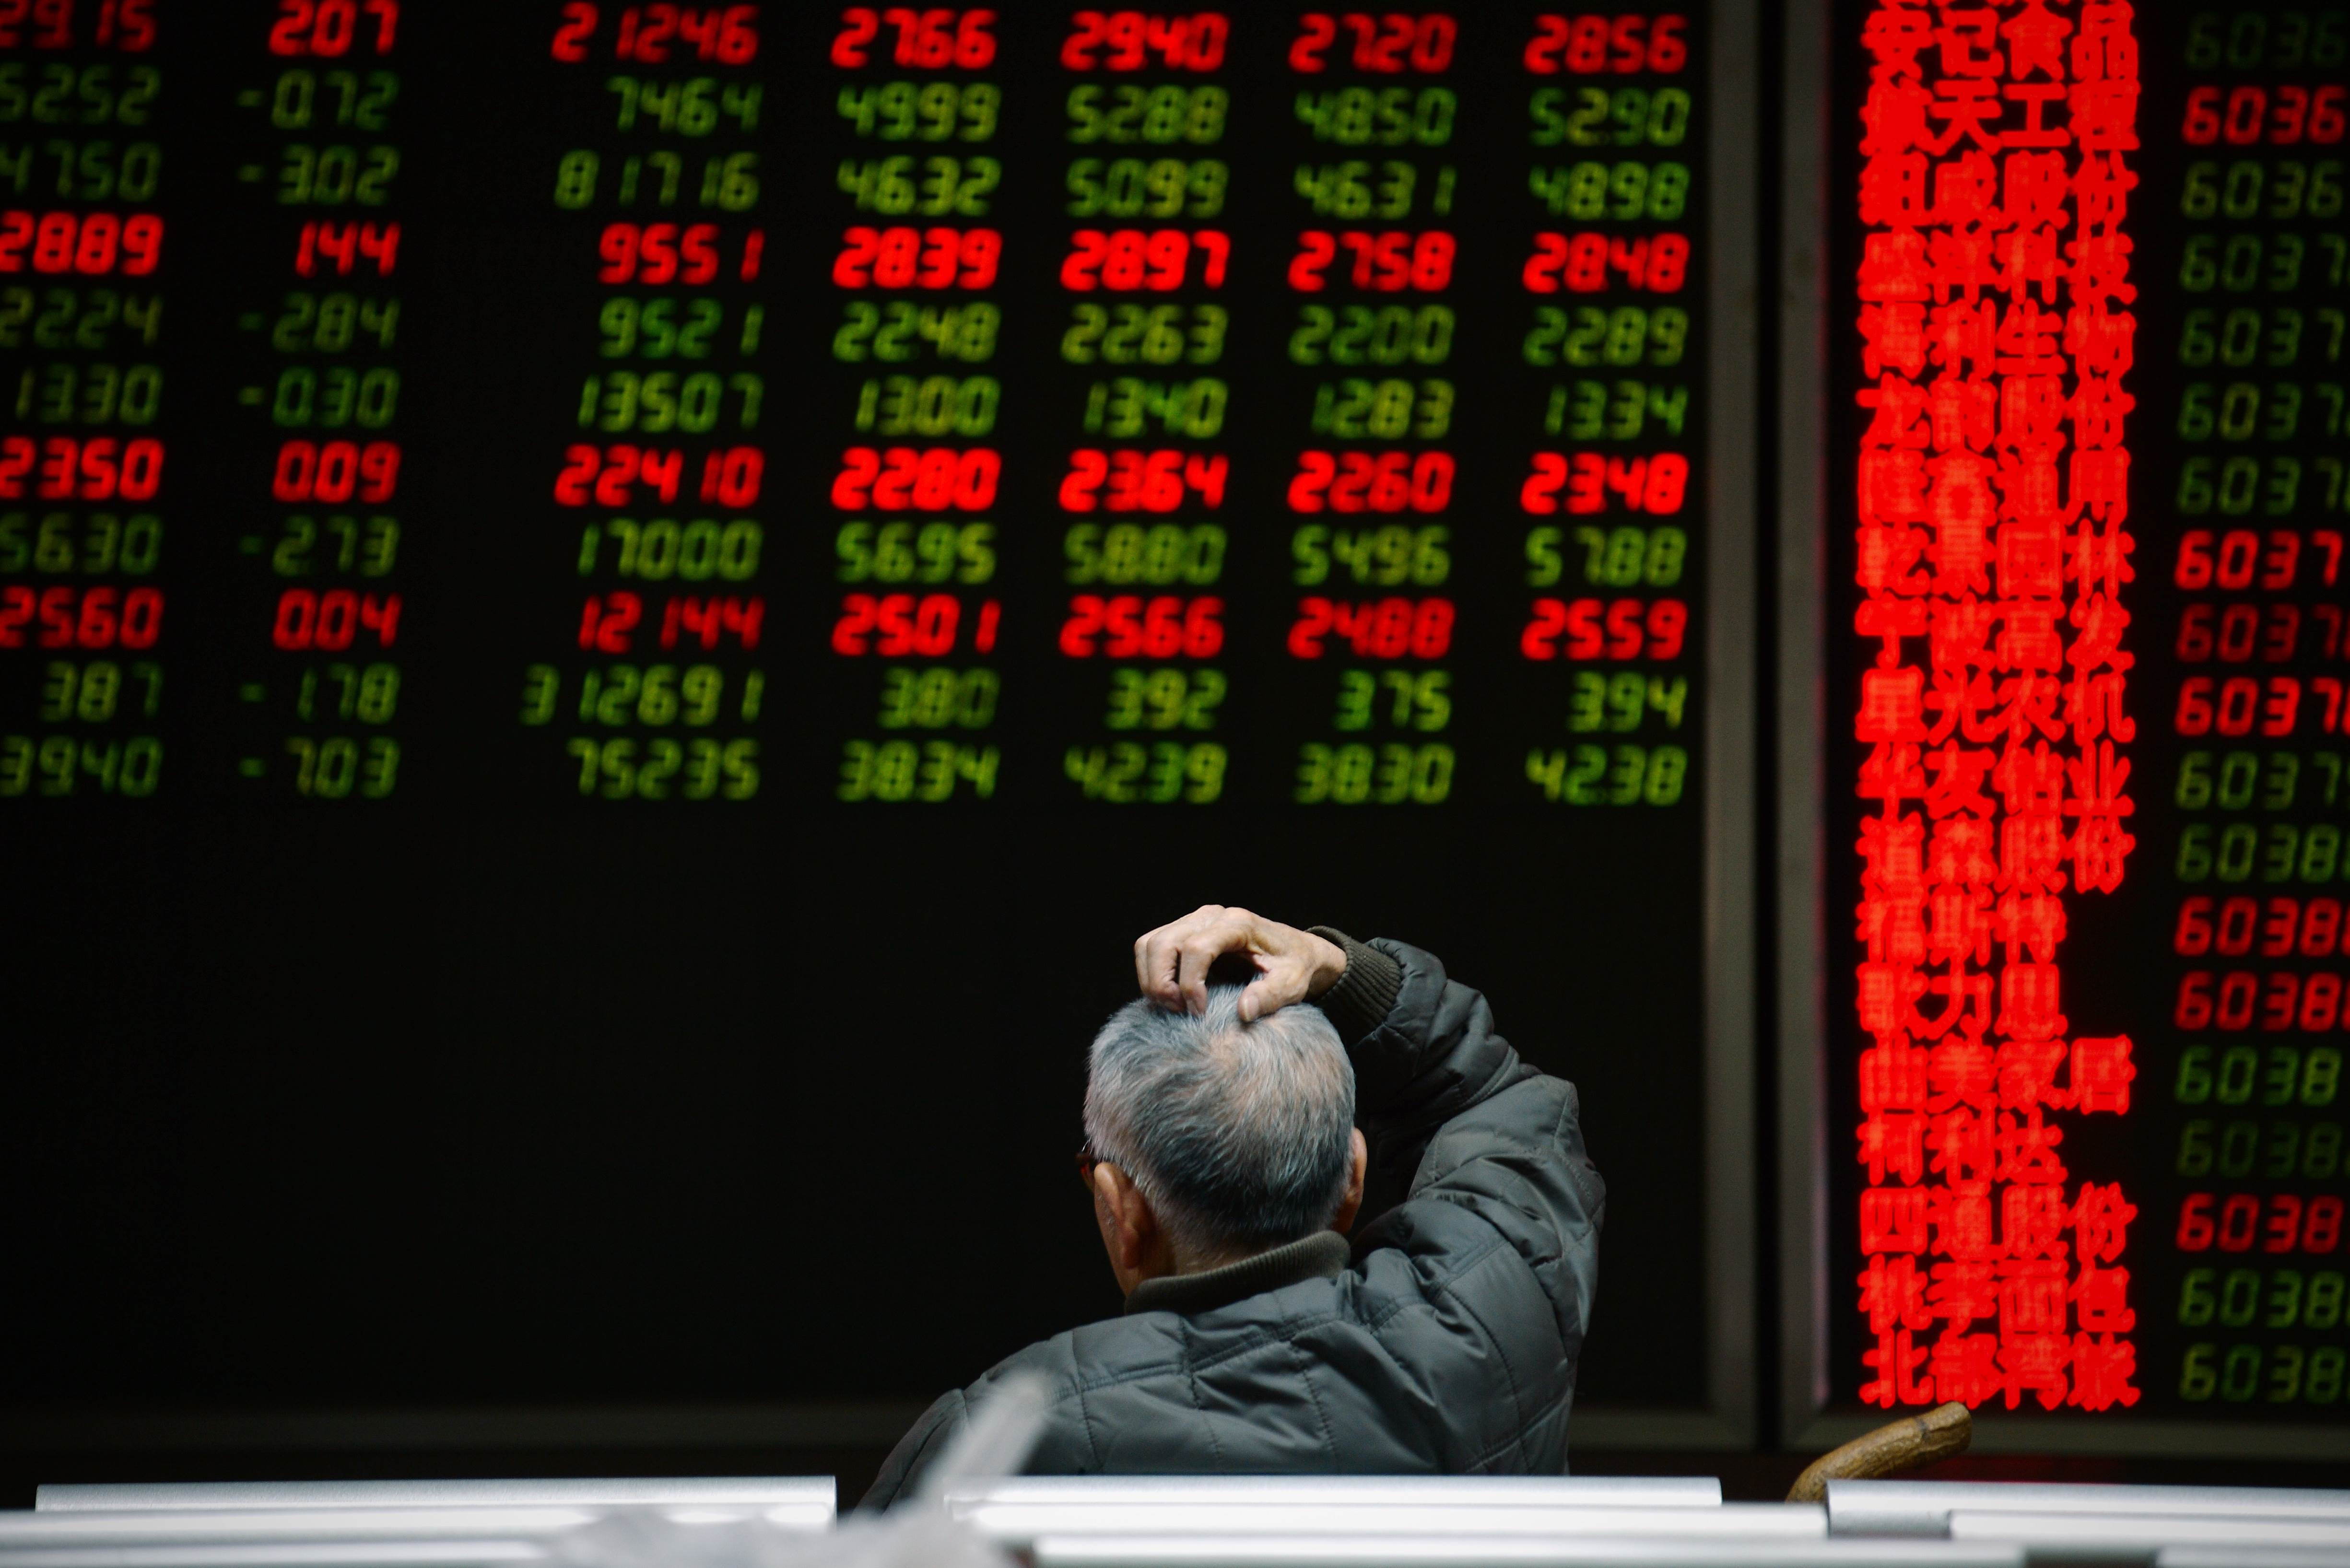 An investor looks at screens showing stock market movements at a securities company in Beijing on January 14, 2016. Shanghai stocks gave up early gains on January 13 to end the morning flat despite a better-than-expected trade report out of China, but Hong Kong rallied. AFP PHOTO / WANG ZHAO